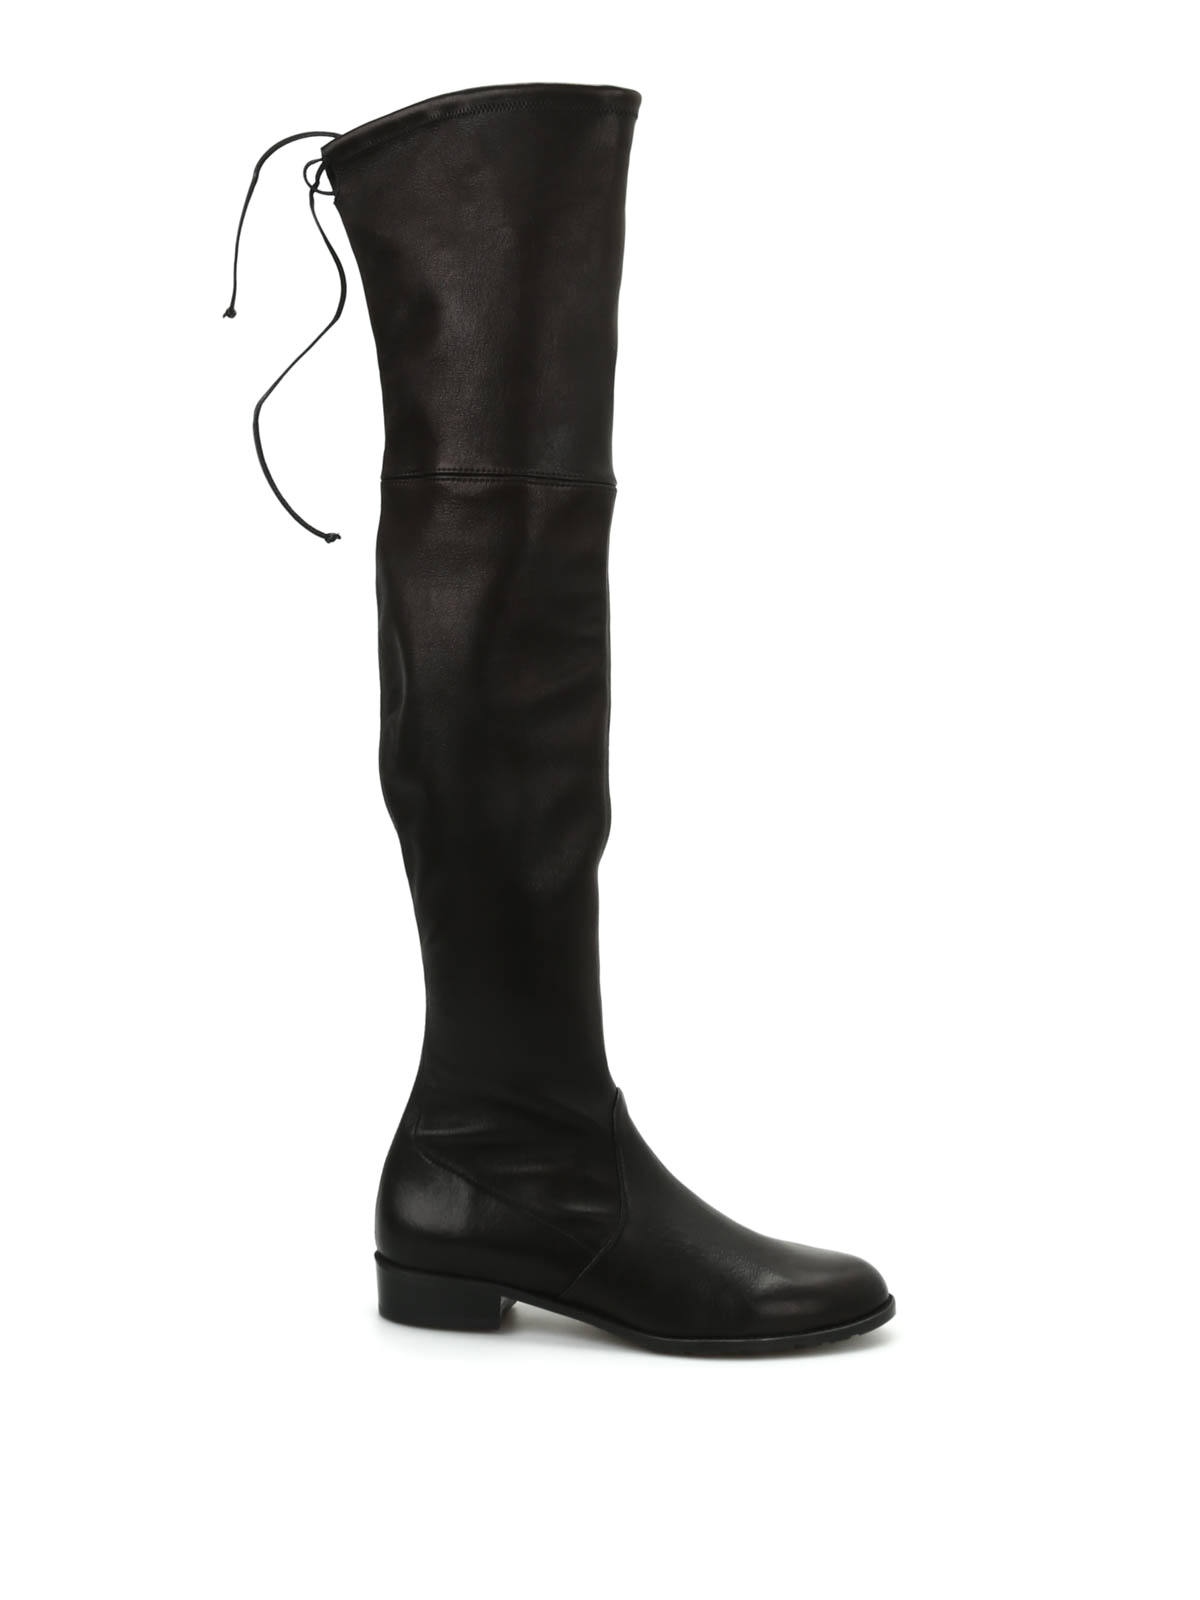 Boots Stuart Weitzman - Lowland leather high boots ...